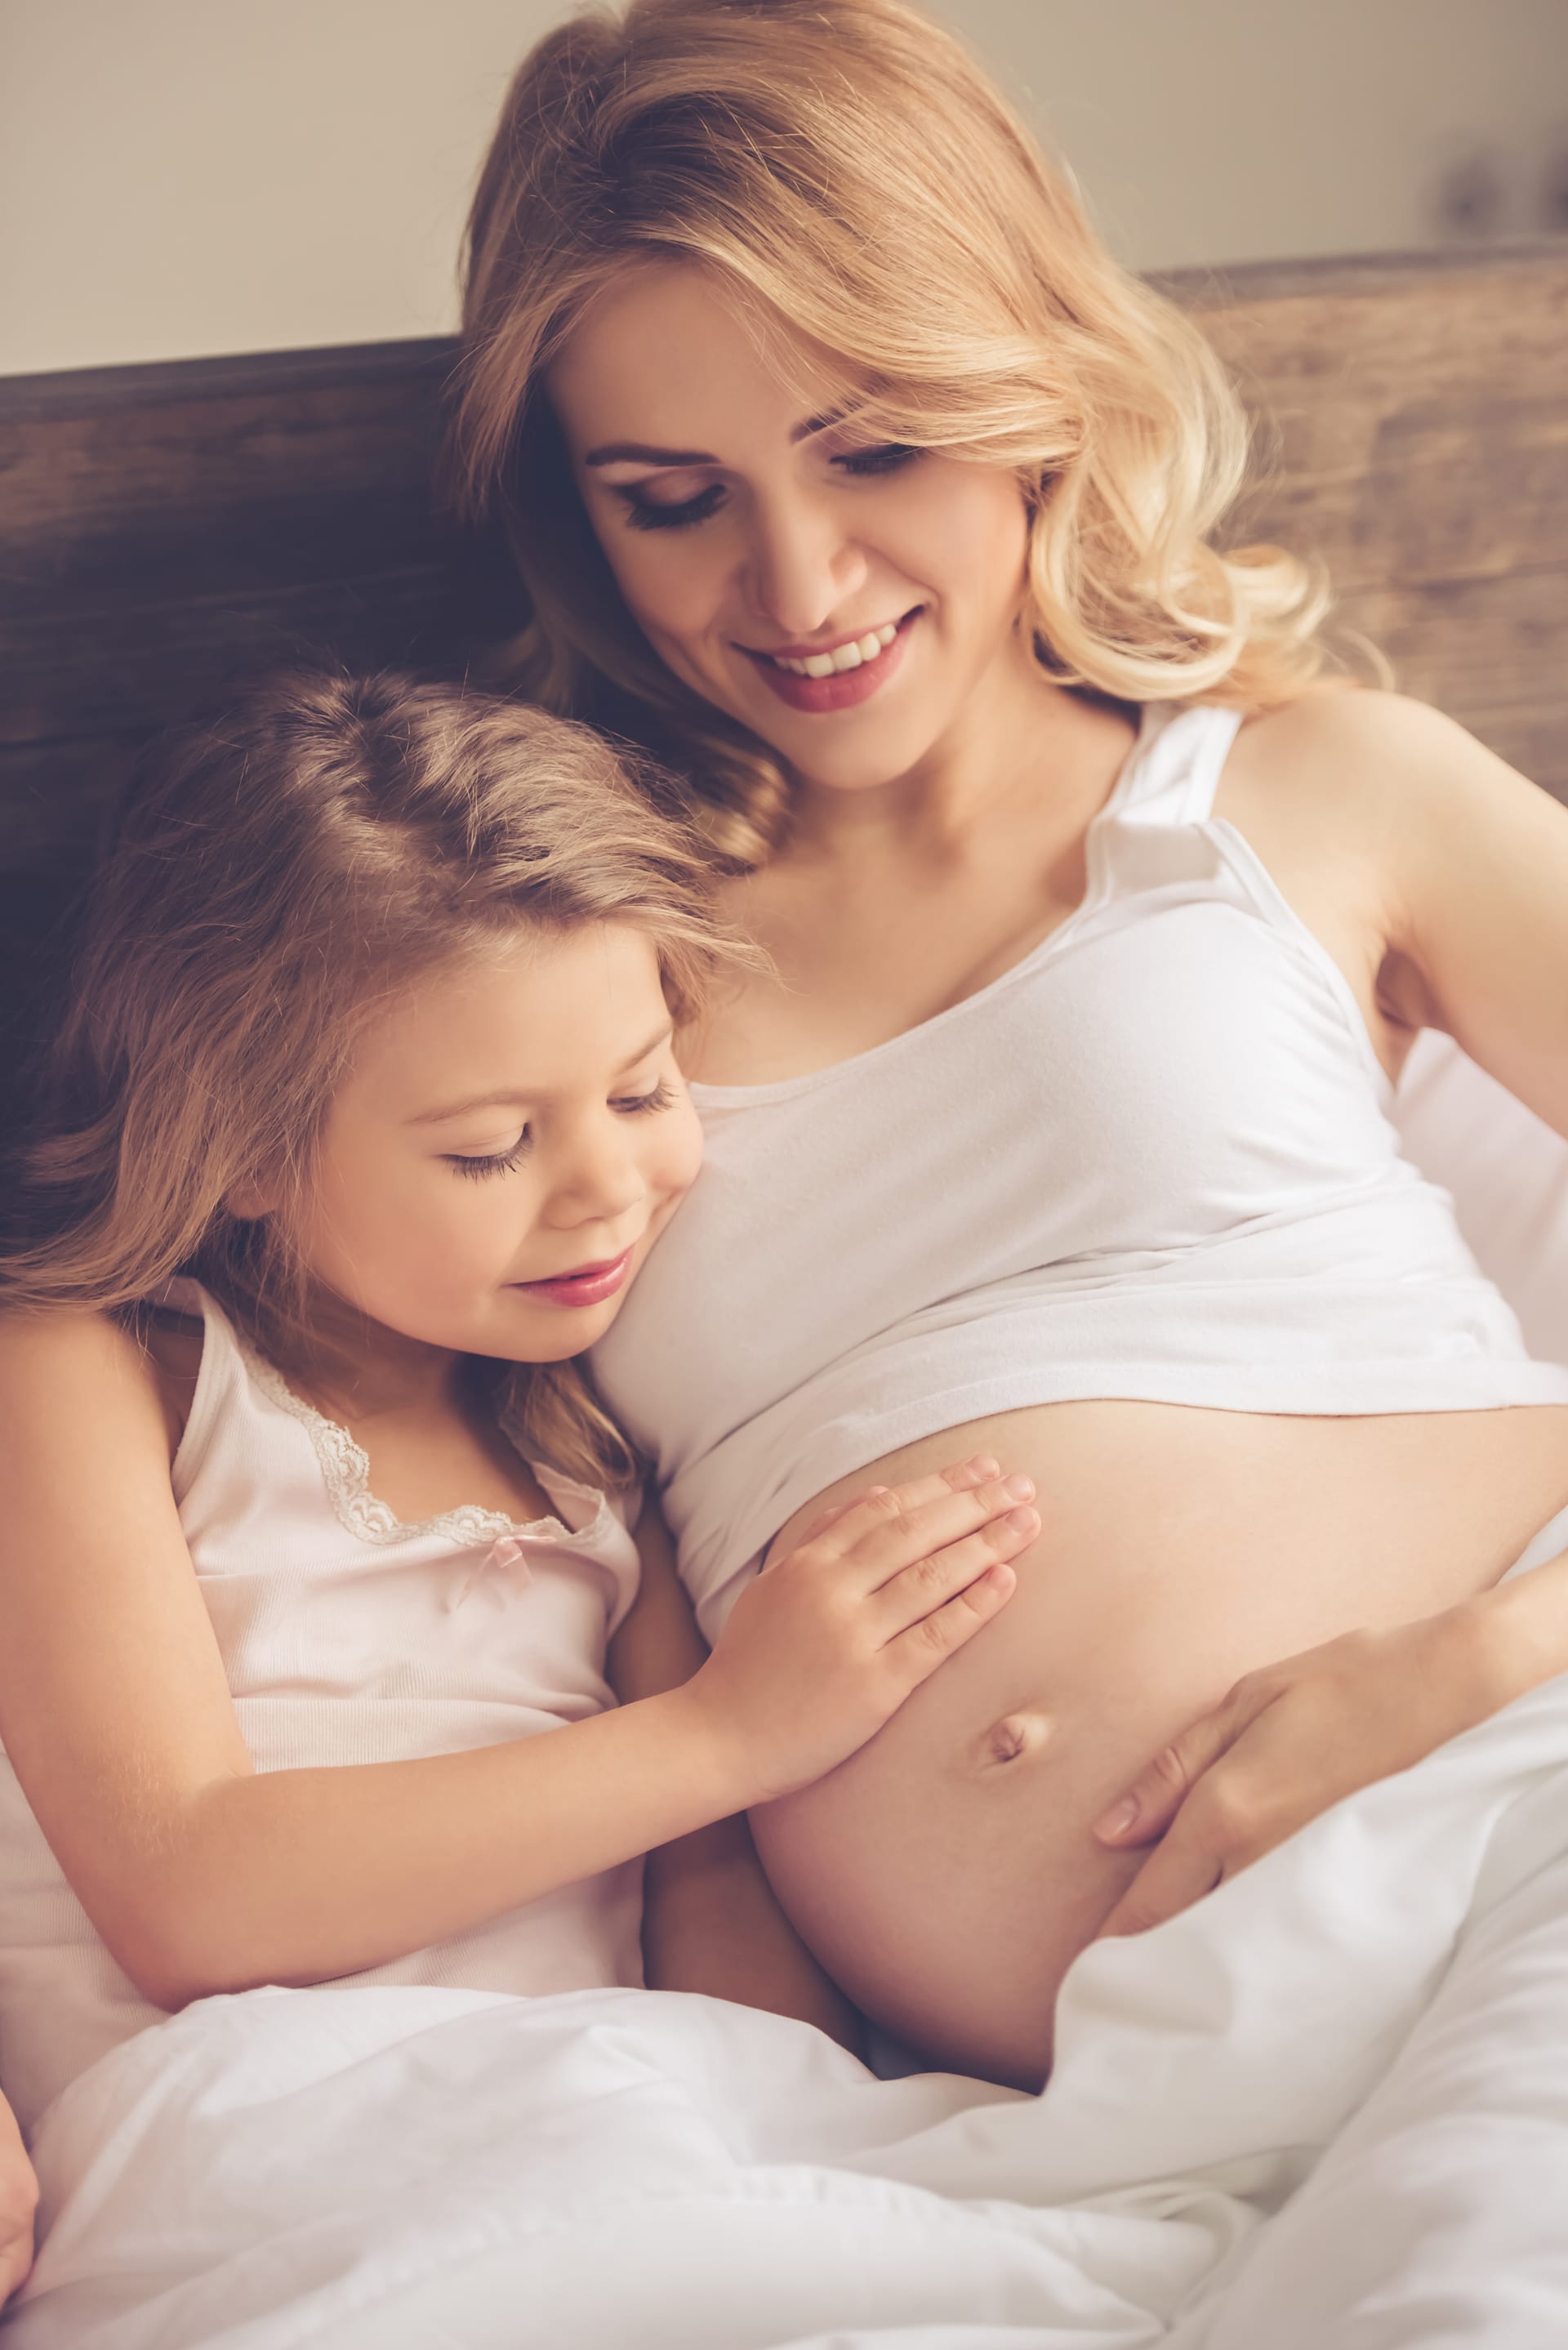 Her beautiful pregnant moms belly smiling while spending time together bed